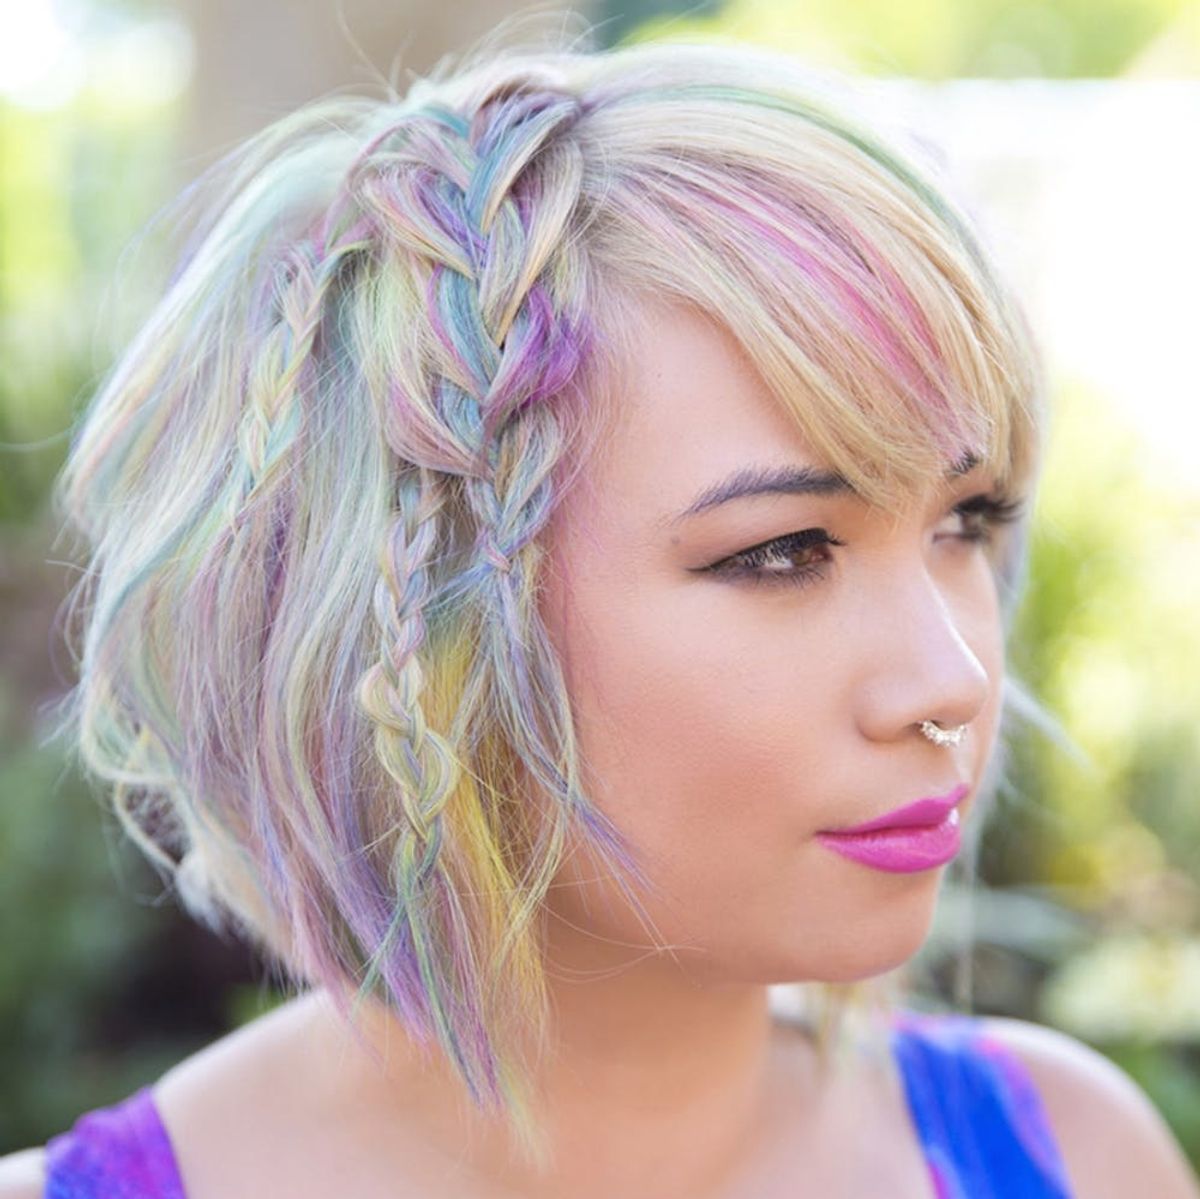 Watercolor Hair Is the Newest Way to Turn Your Hair Into a Work of Art